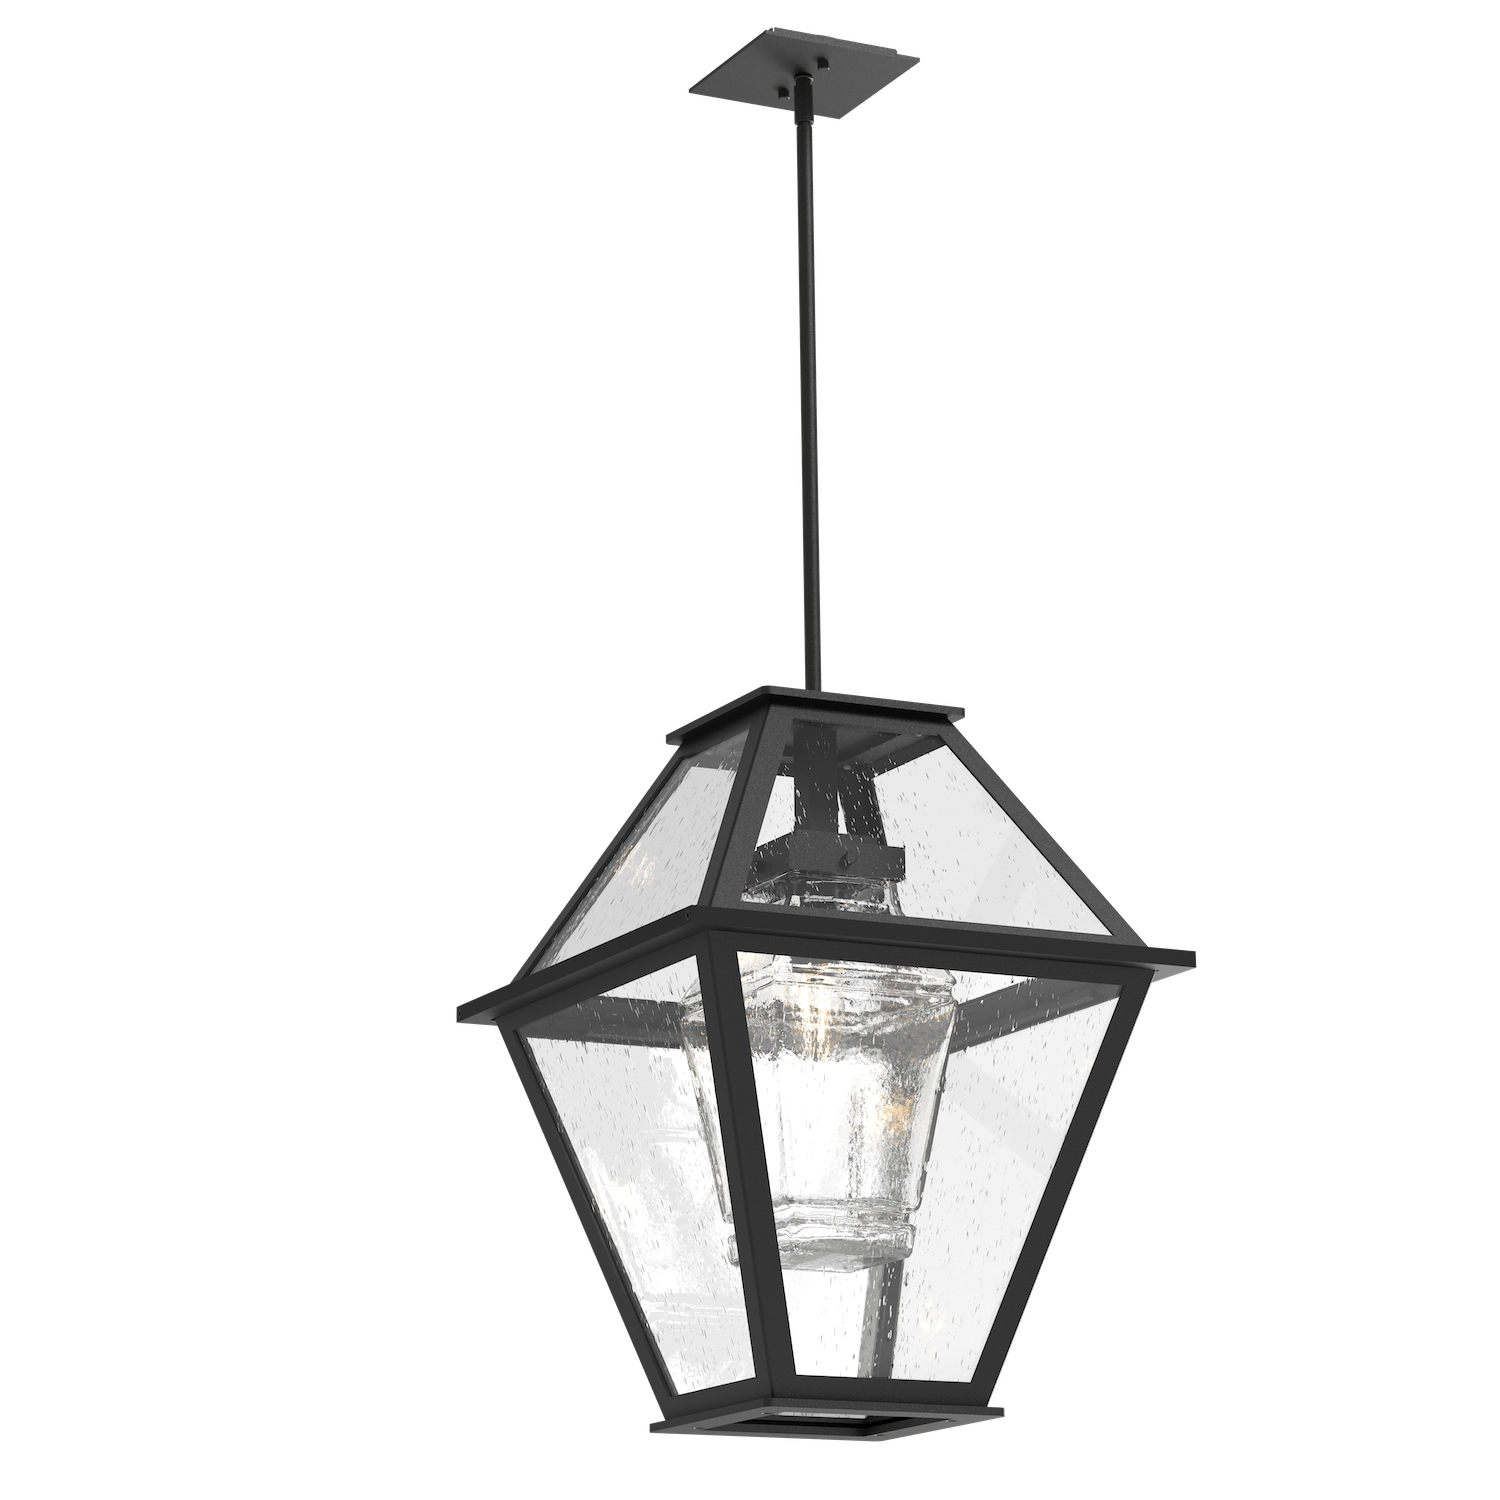 OPB0072-01-TB-C-Hammerton-Studio-Terrace-24-inch-outdoor-nested-pendant-light-with-textured-black-finish-and-clear-blown-glass-shades-and-incandescent-lamping